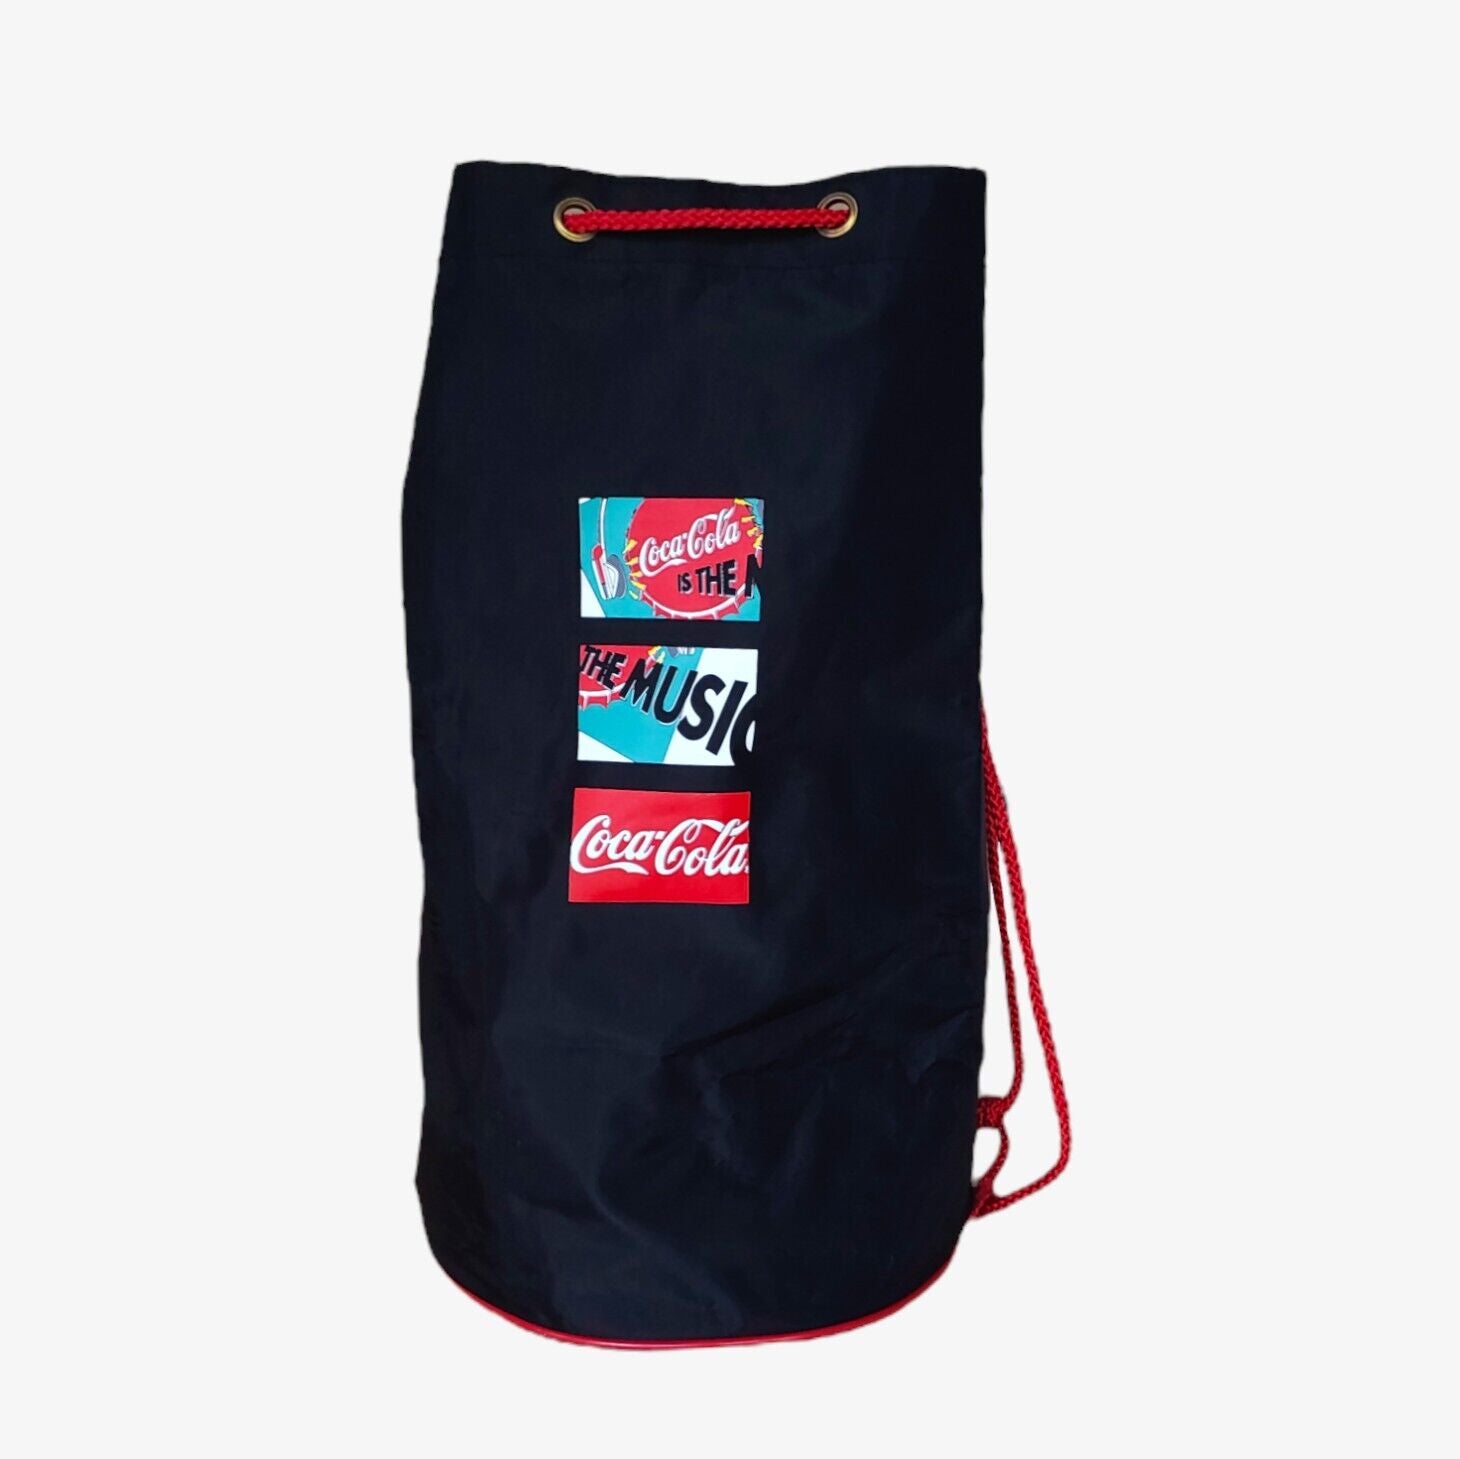 Vintage 1993 Coca Cola Is The Music Promotional Drawstring Backpack Back - Casspios Dream